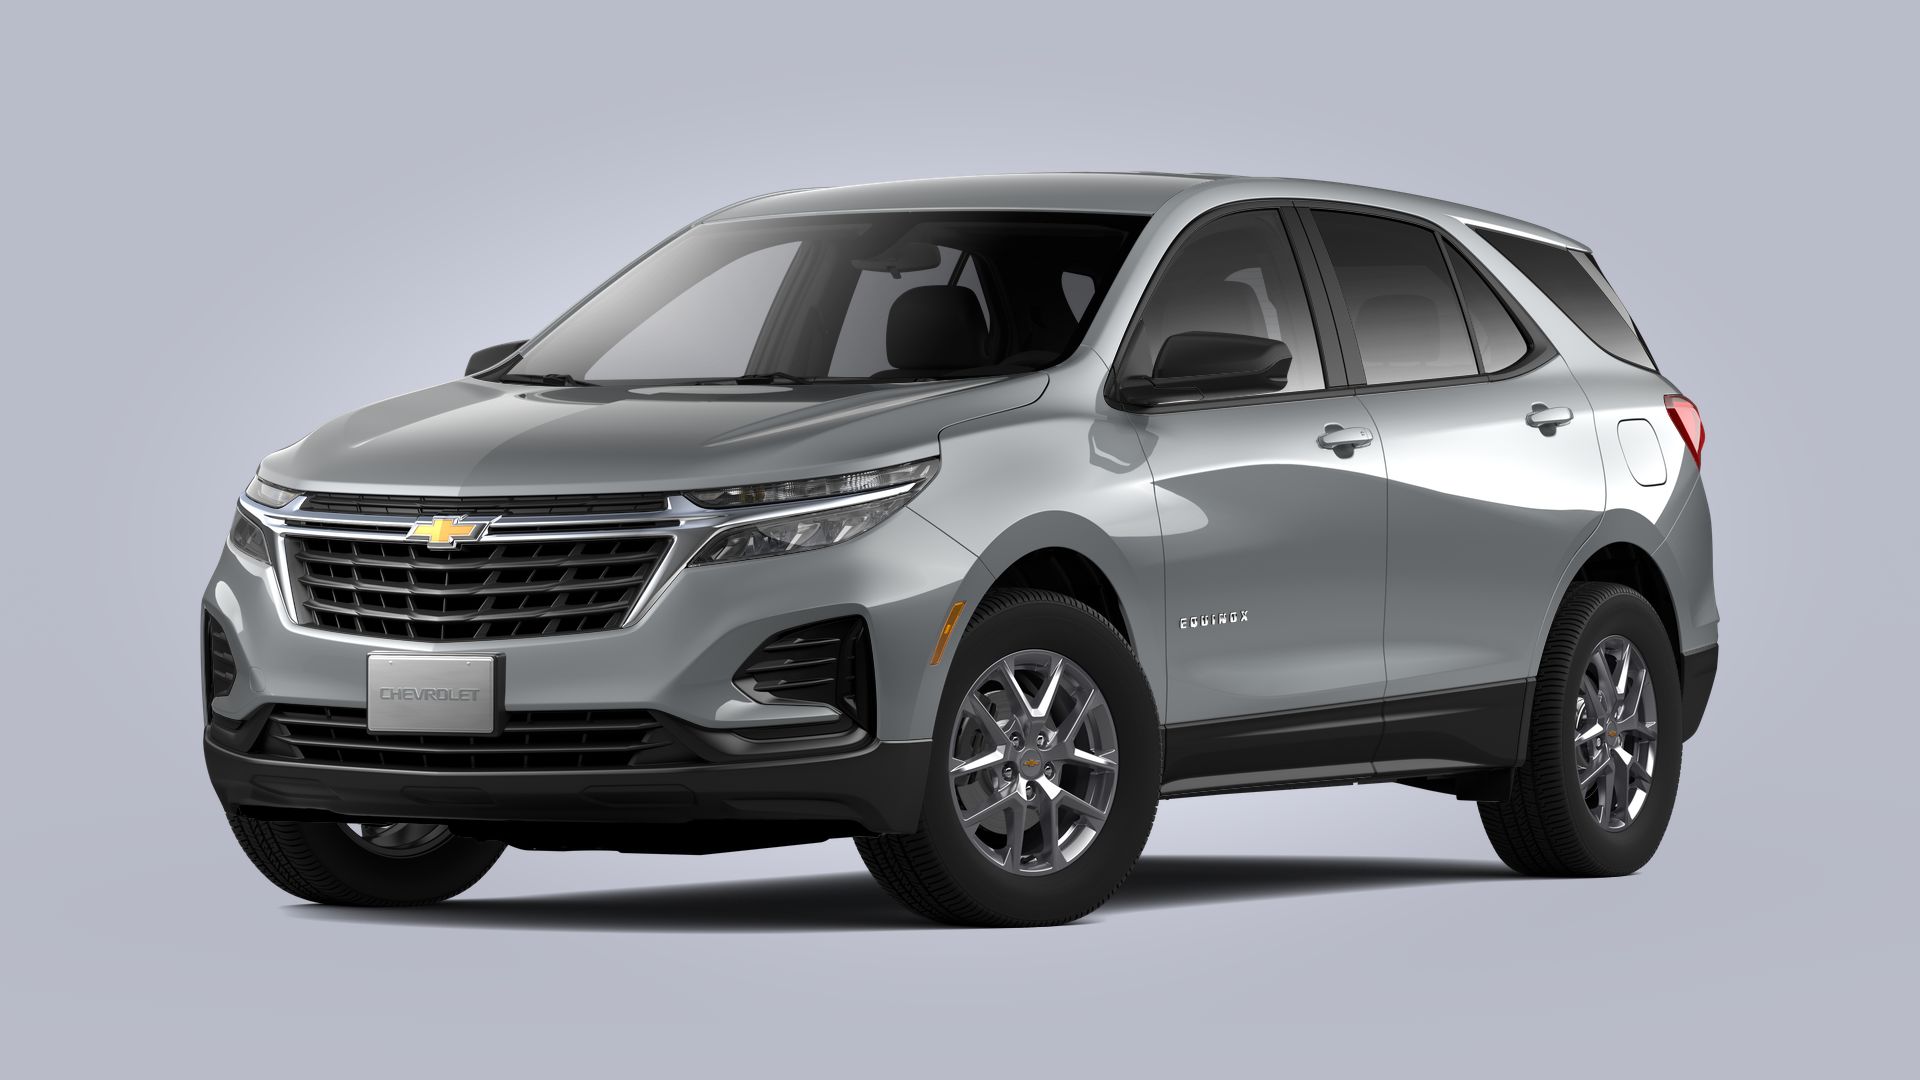 How To Change Voice Recognition On Chevy Equinox